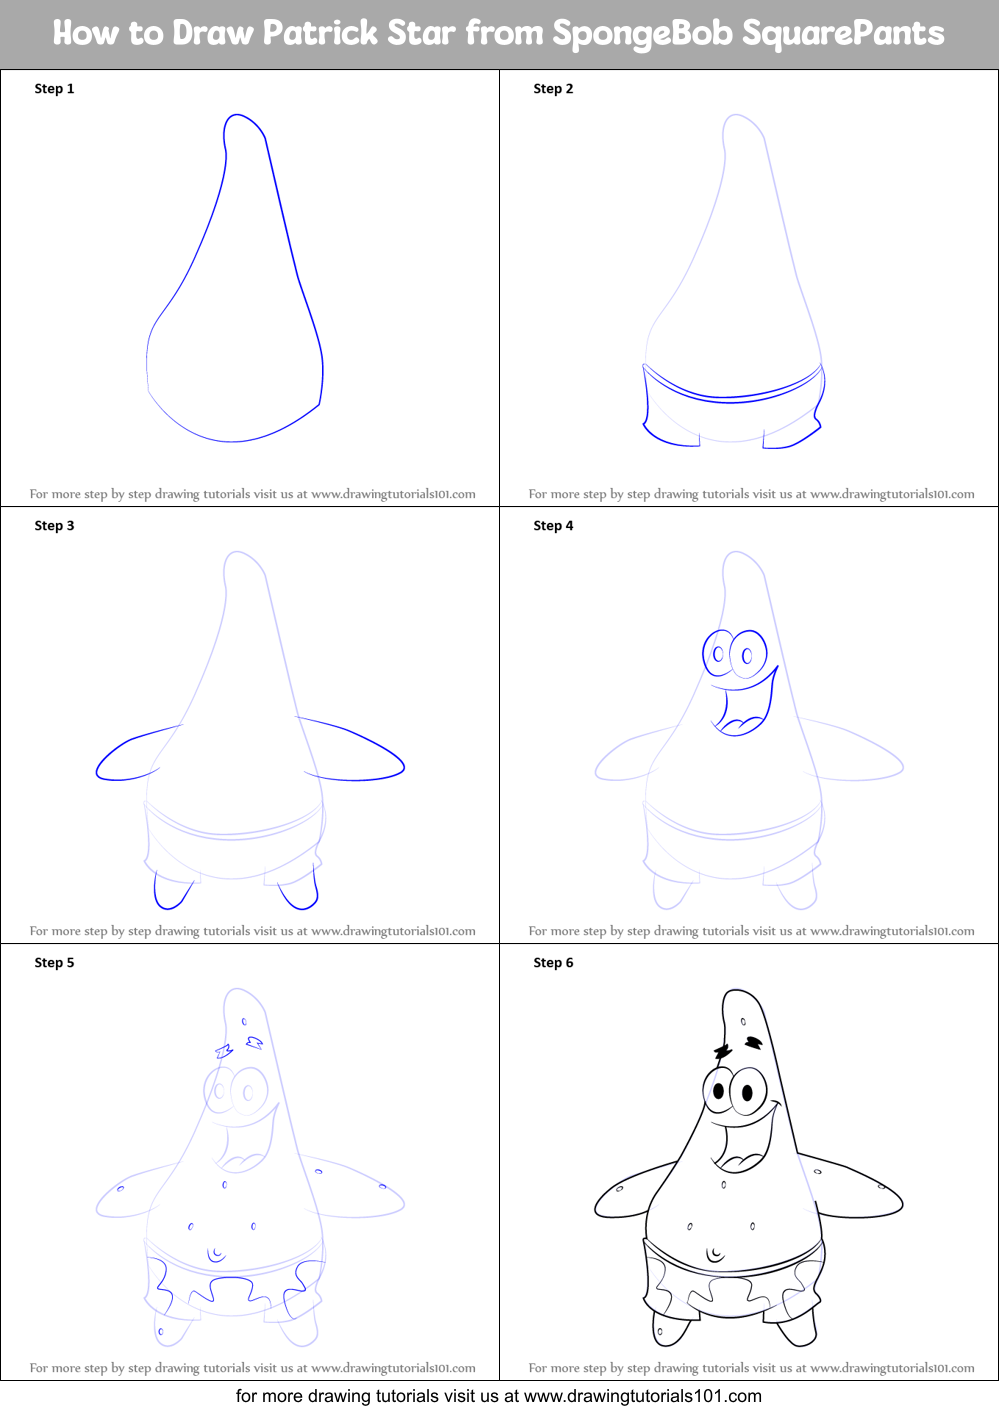 How to Draw Patrick Star from SpongeBob SquarePants printable step by